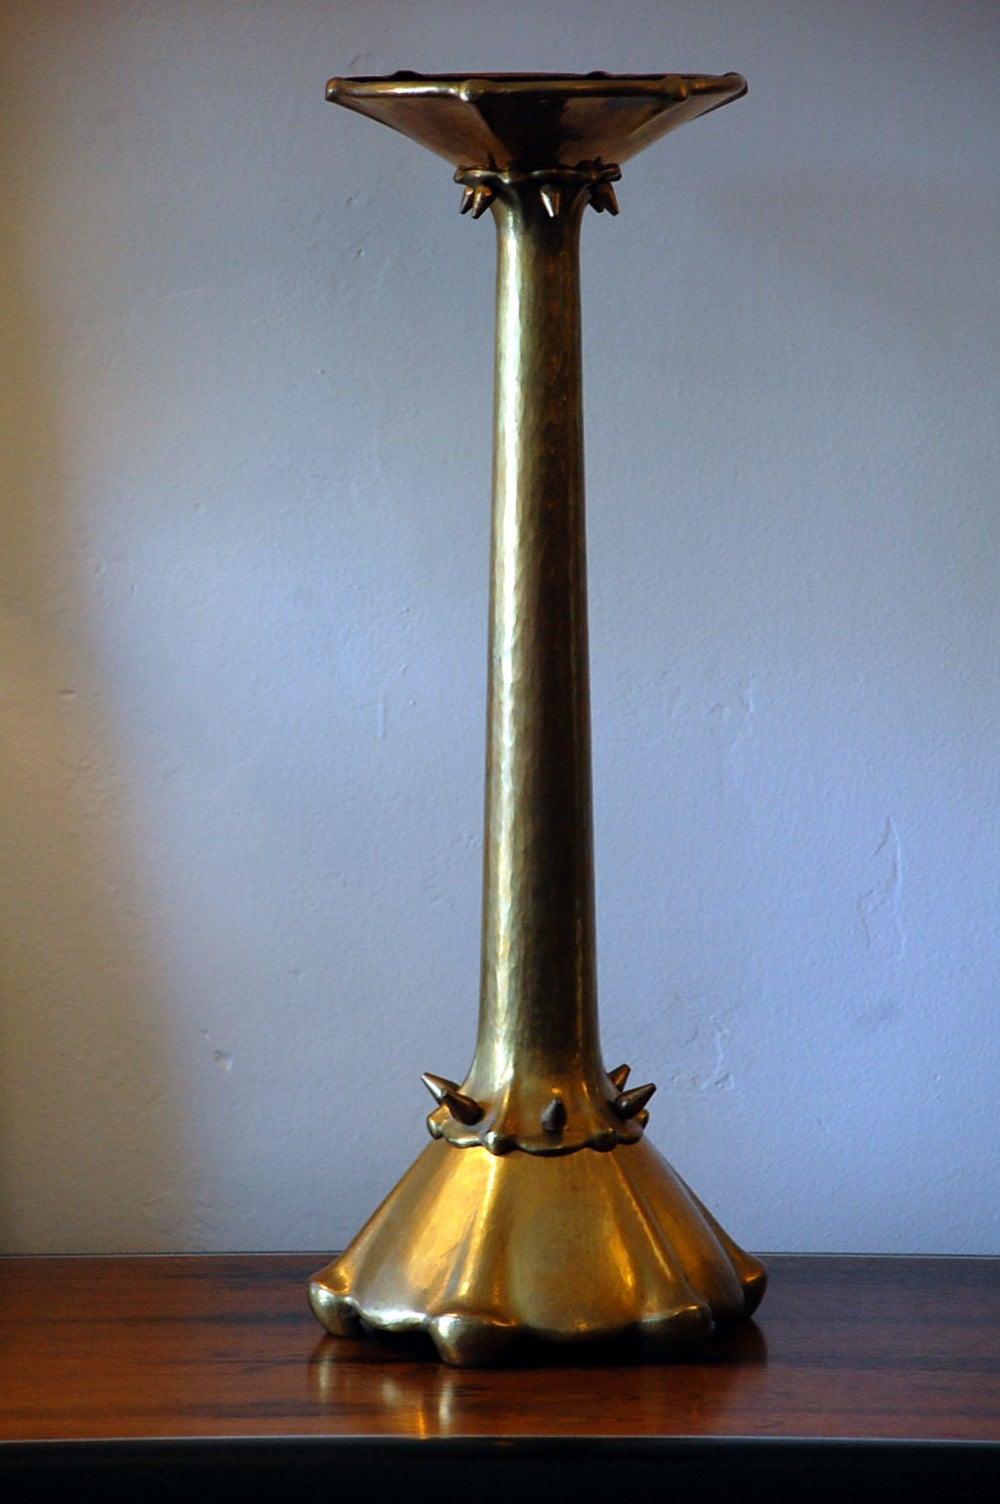 Rare Hammered Brass Candlestick by Atelier Brom In Excellent Condition For Sale In Los Angeles, CA